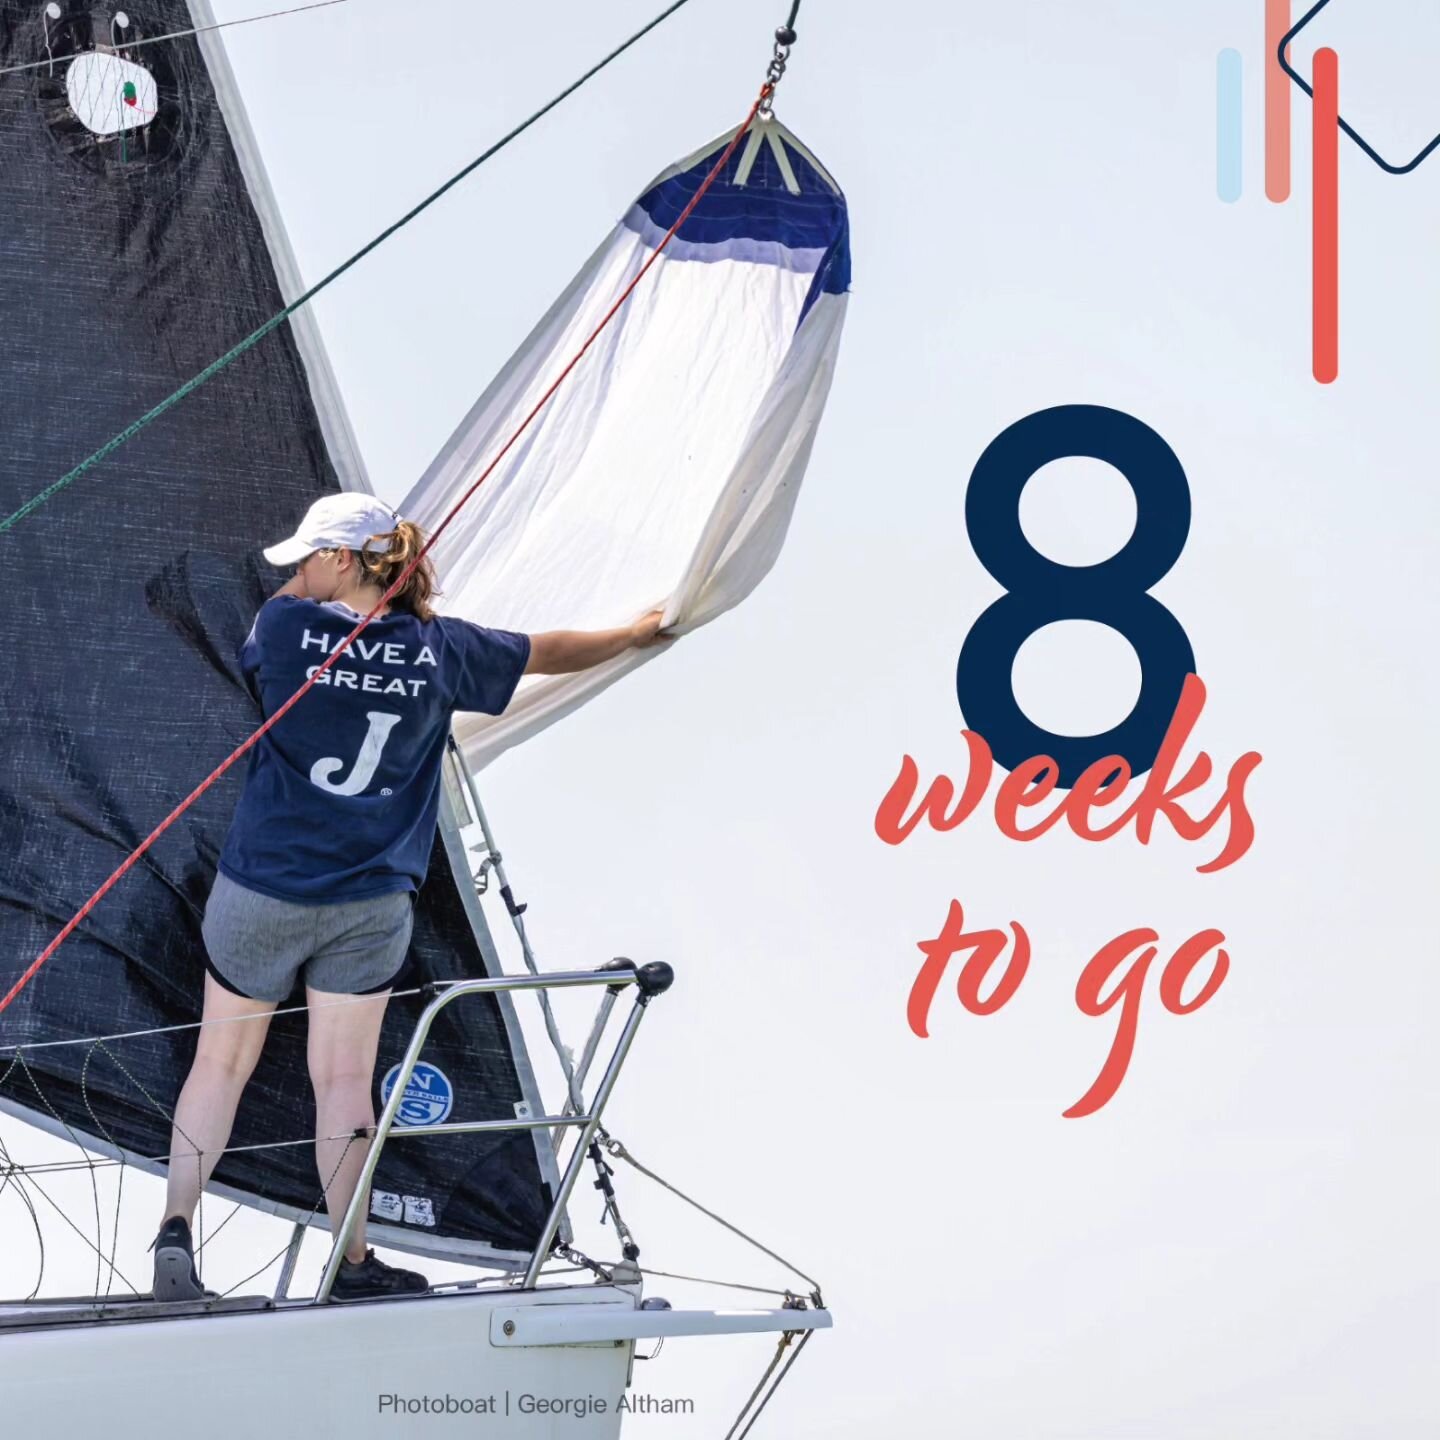 🚨Only 8 weeks left until WOKC 2024! Who's excited to Race 🏁, Learn ⛵&amp; Party 🥂?!? Tag your crew and get ready for an awesome time! Check the link in bio for more info.🚨
#wokc2024 #onesails #harken #royalsouthernyachtclub #britishkeelboatleague